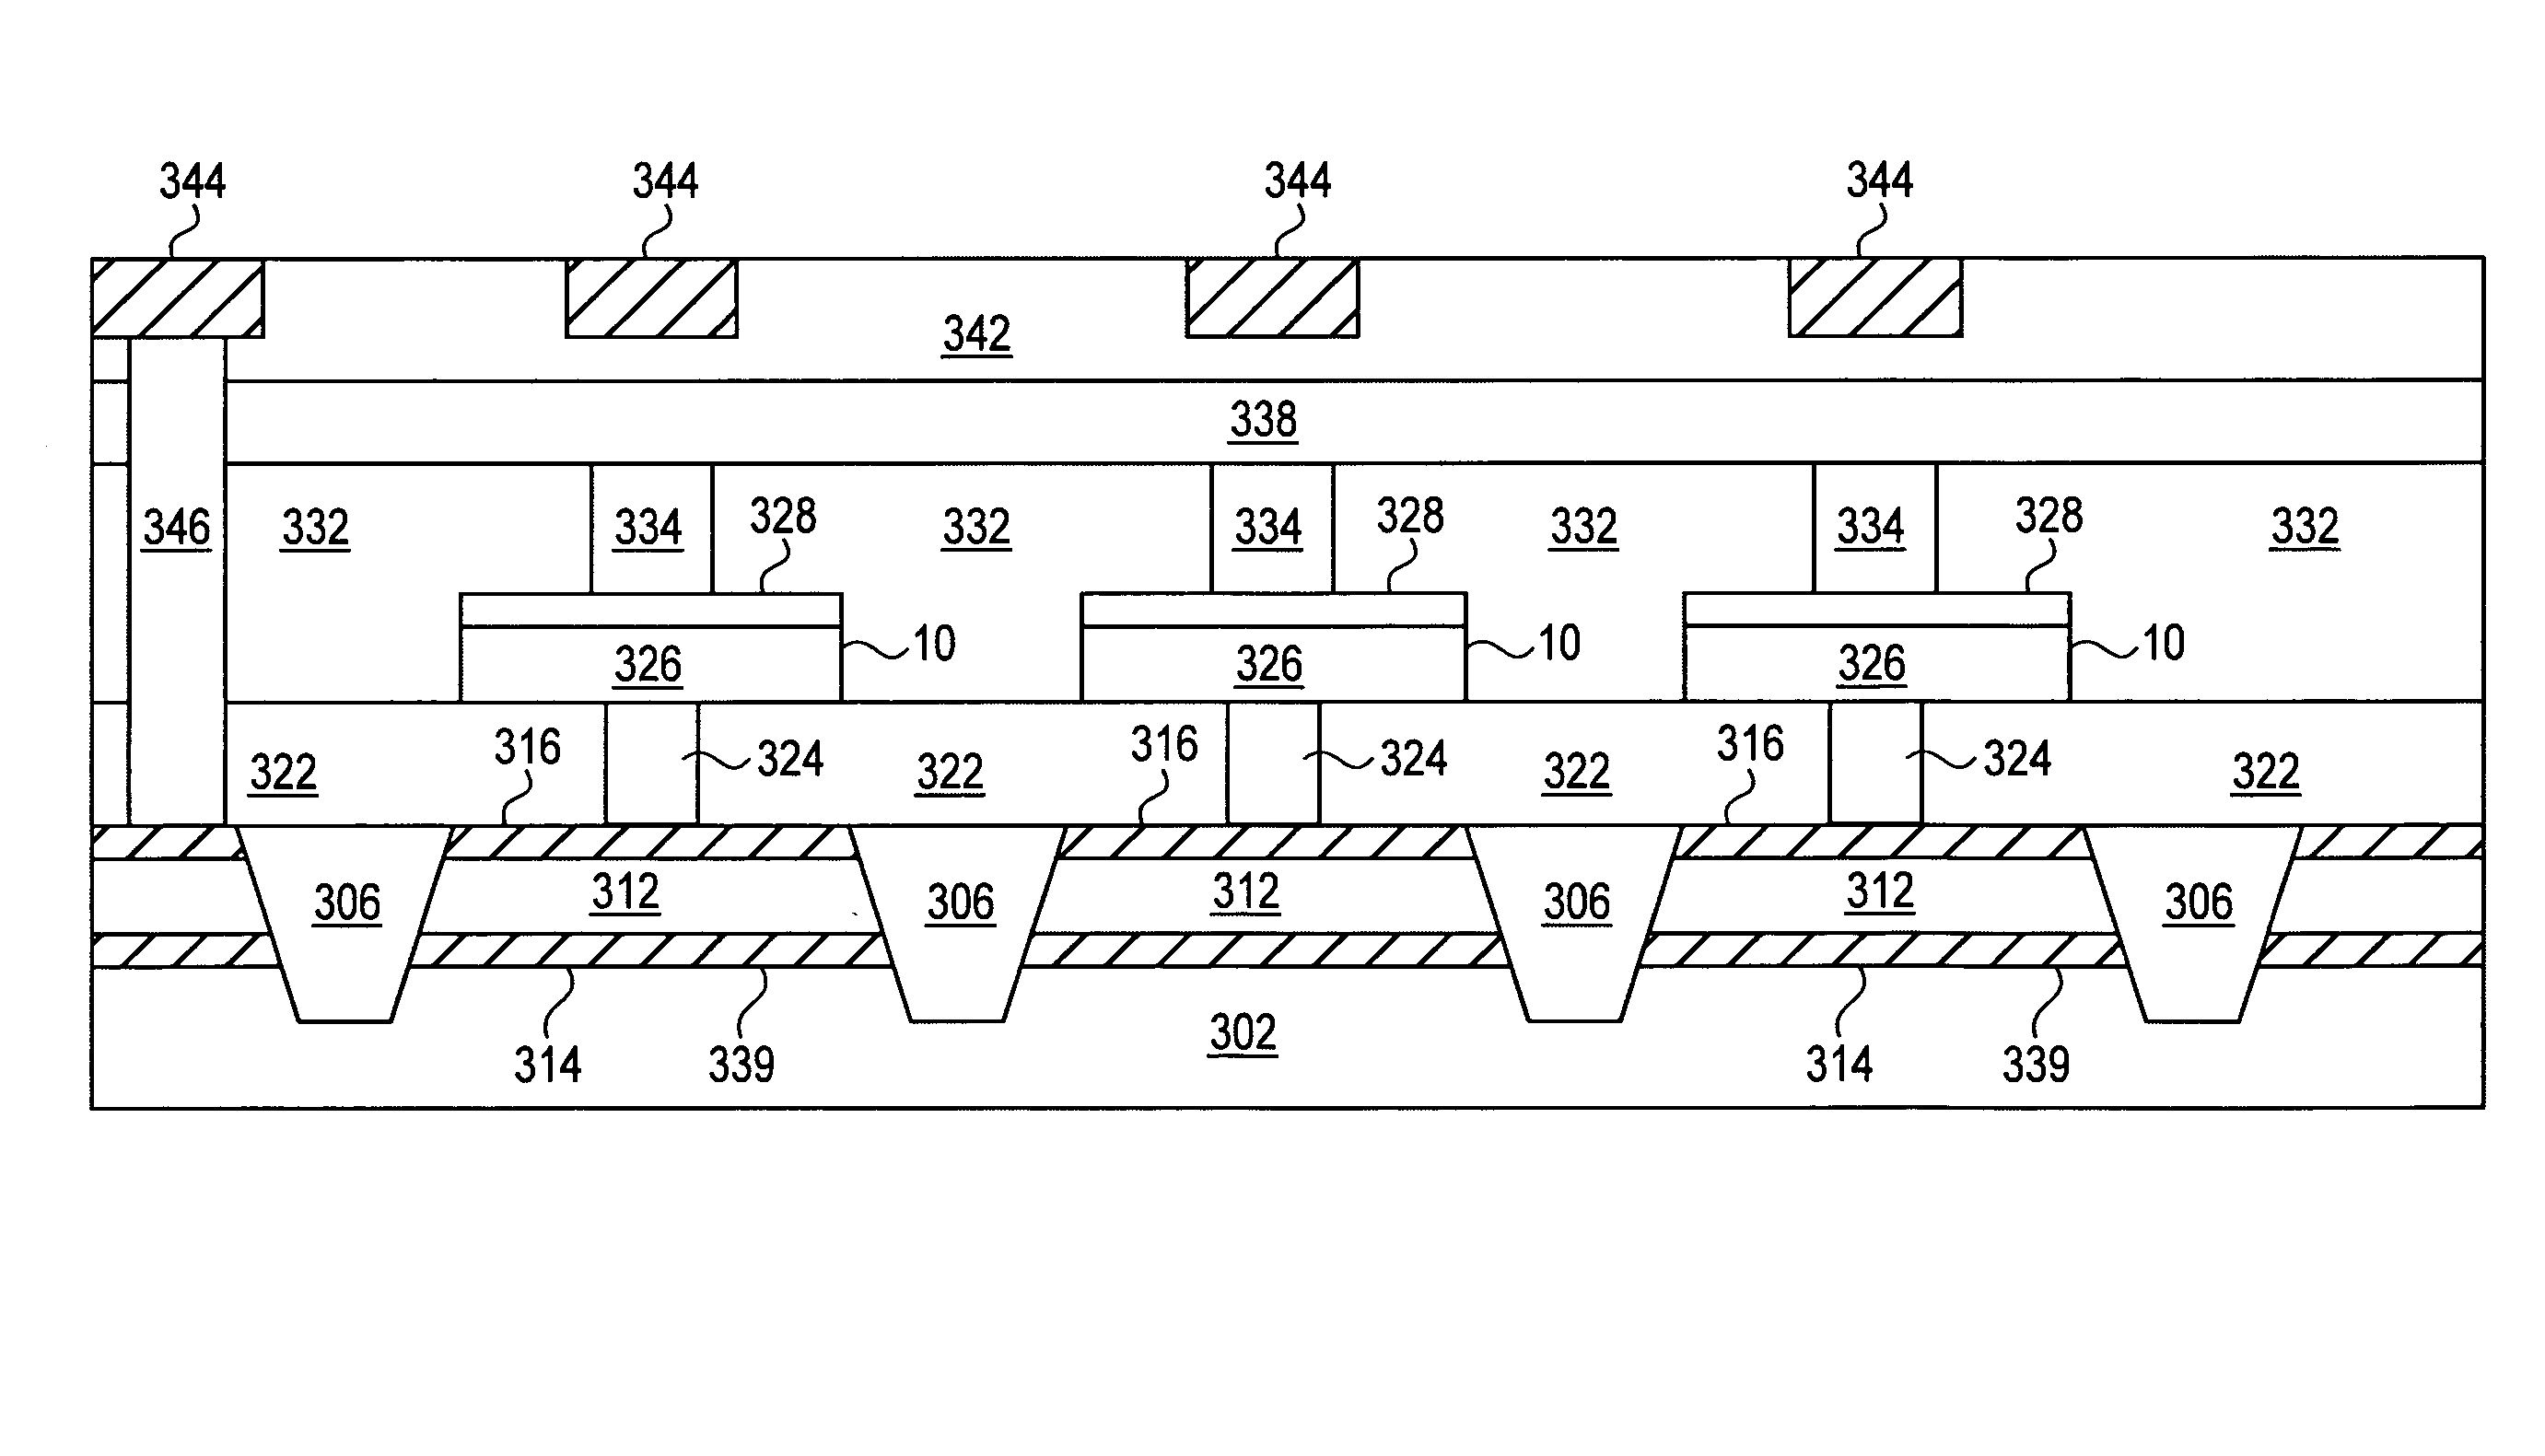 Circuit, biasing scheme and fabrication method for diode accesed cross-point resistive memory array